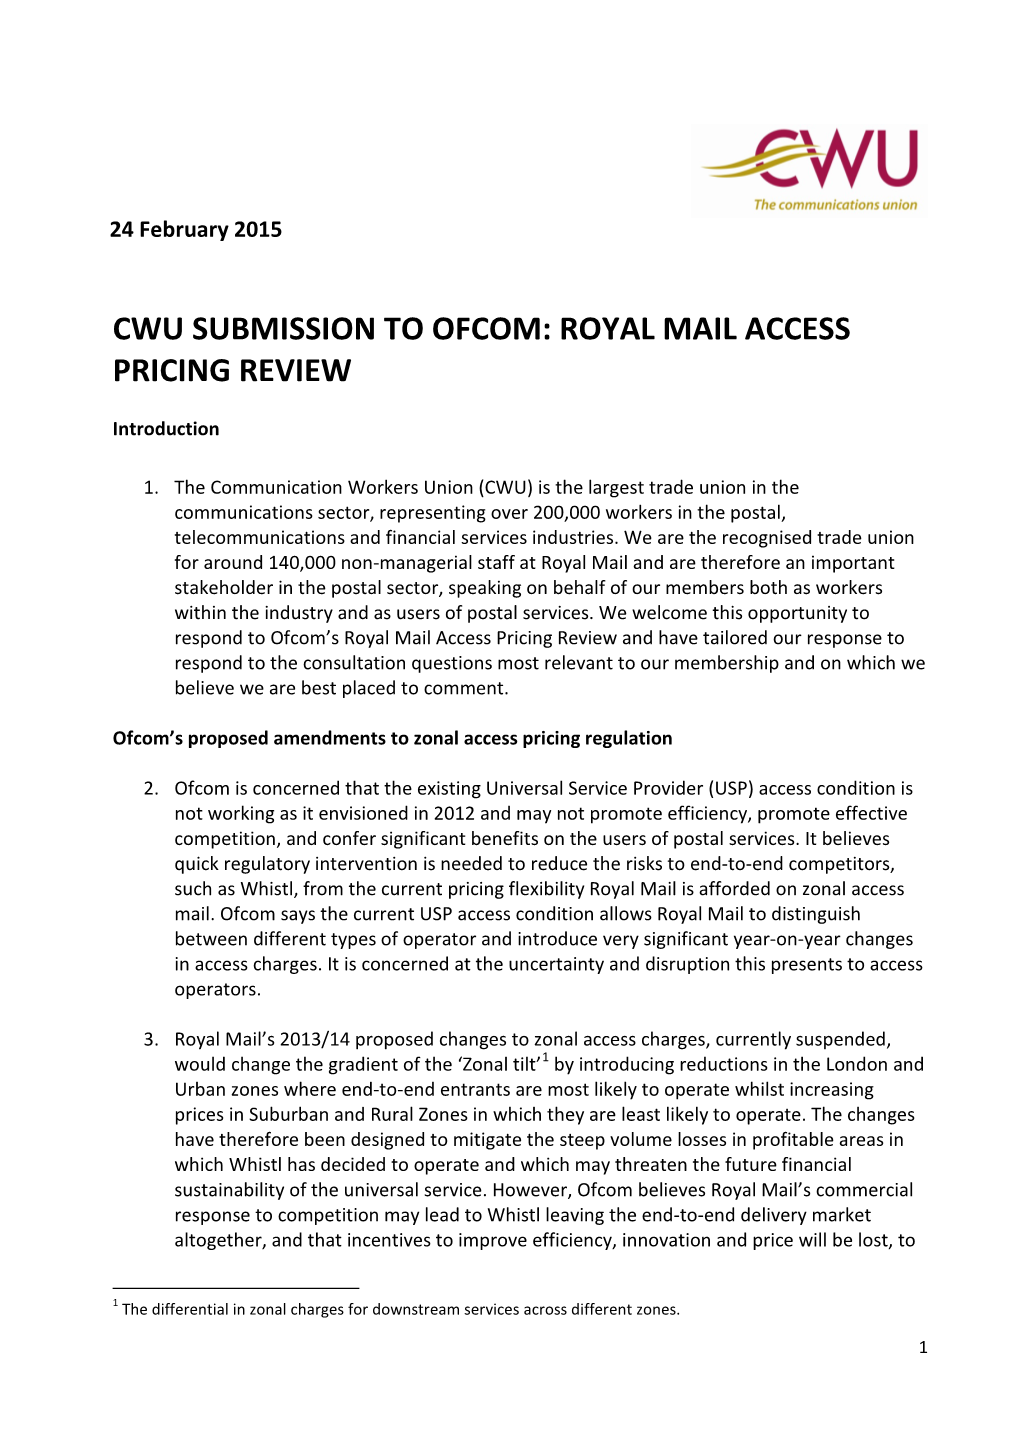 Cwu Submission to Ofcom: Royal Mail Access Pricing Review